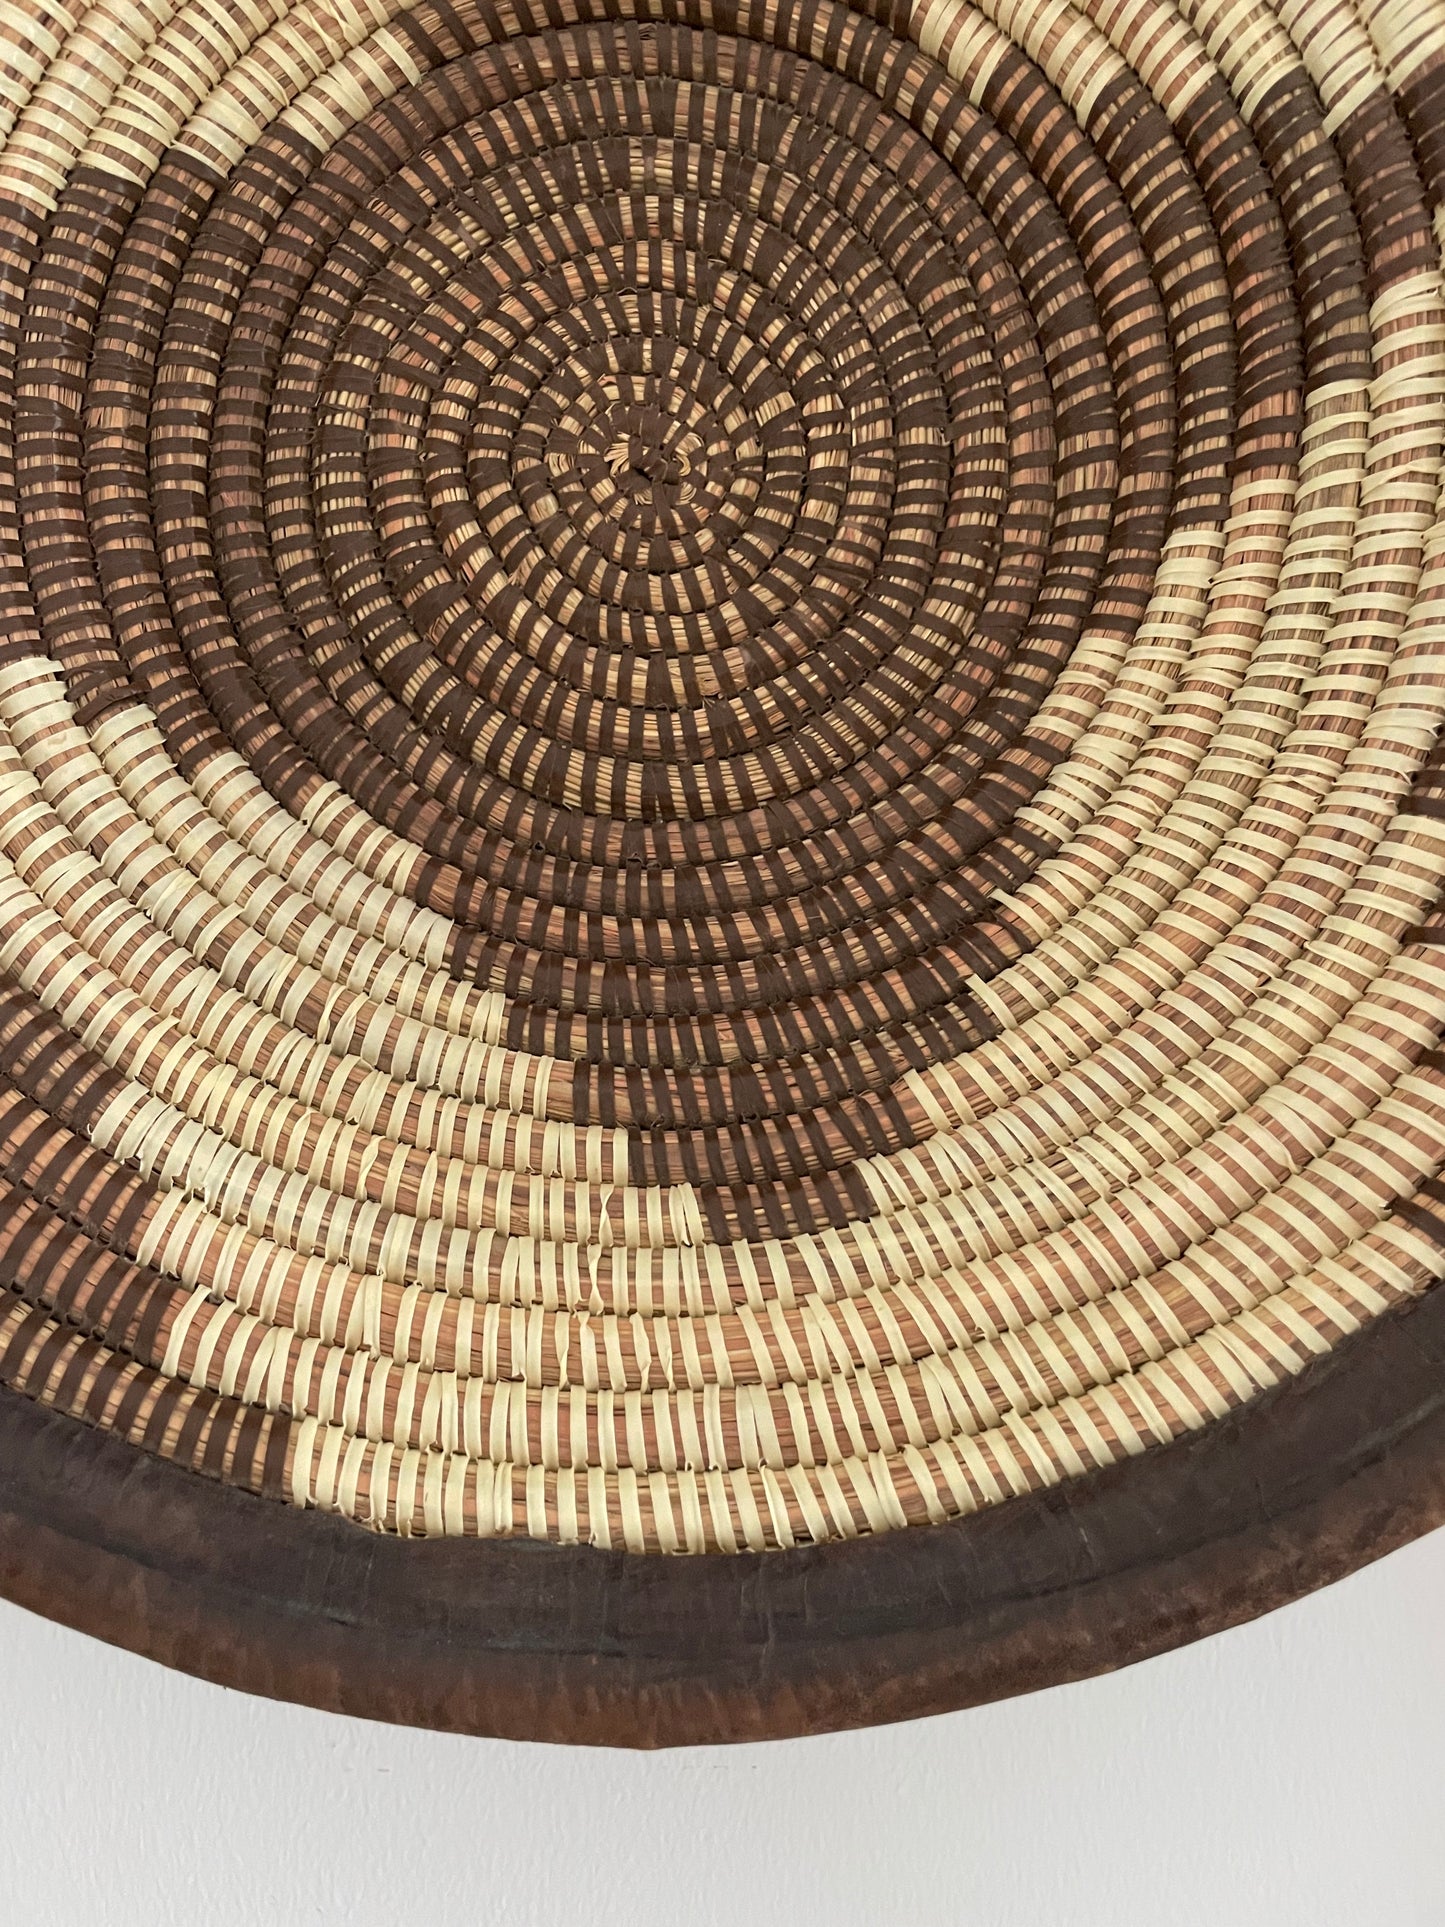 Wicker baskets for wall or table. Braided in elephant grass with leather or textile edging. Fair Trade from Senegal